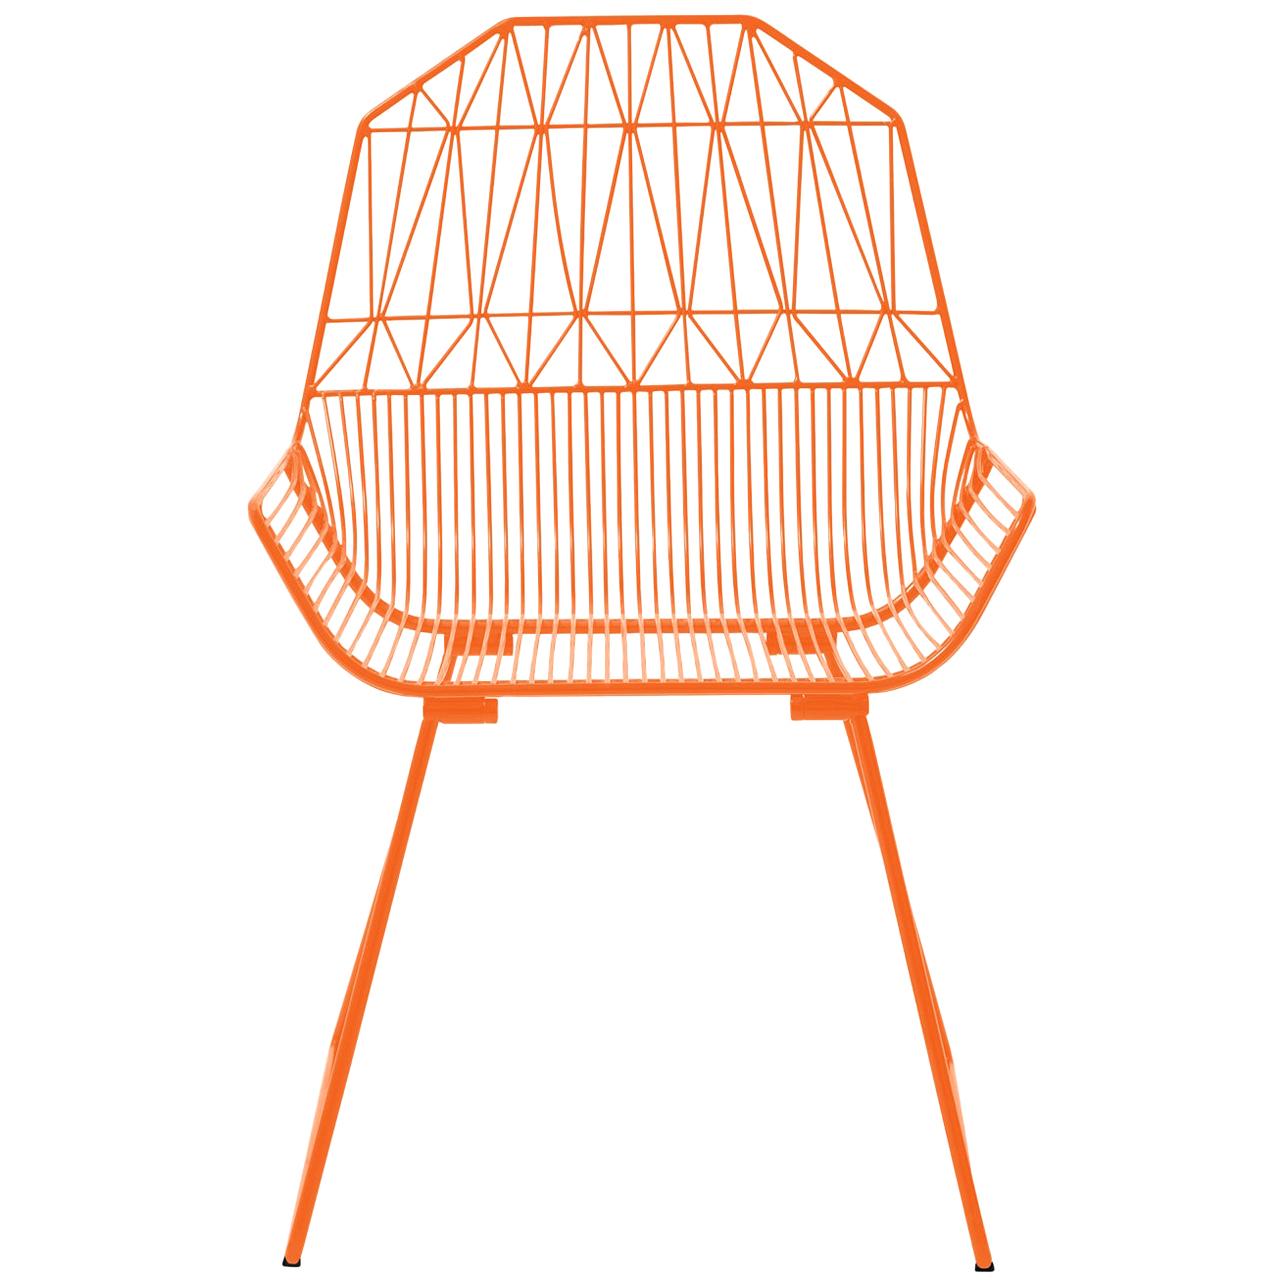 Modern, Midcentury Inspired Wire Lounge Chair, The Farmhouse in Orange